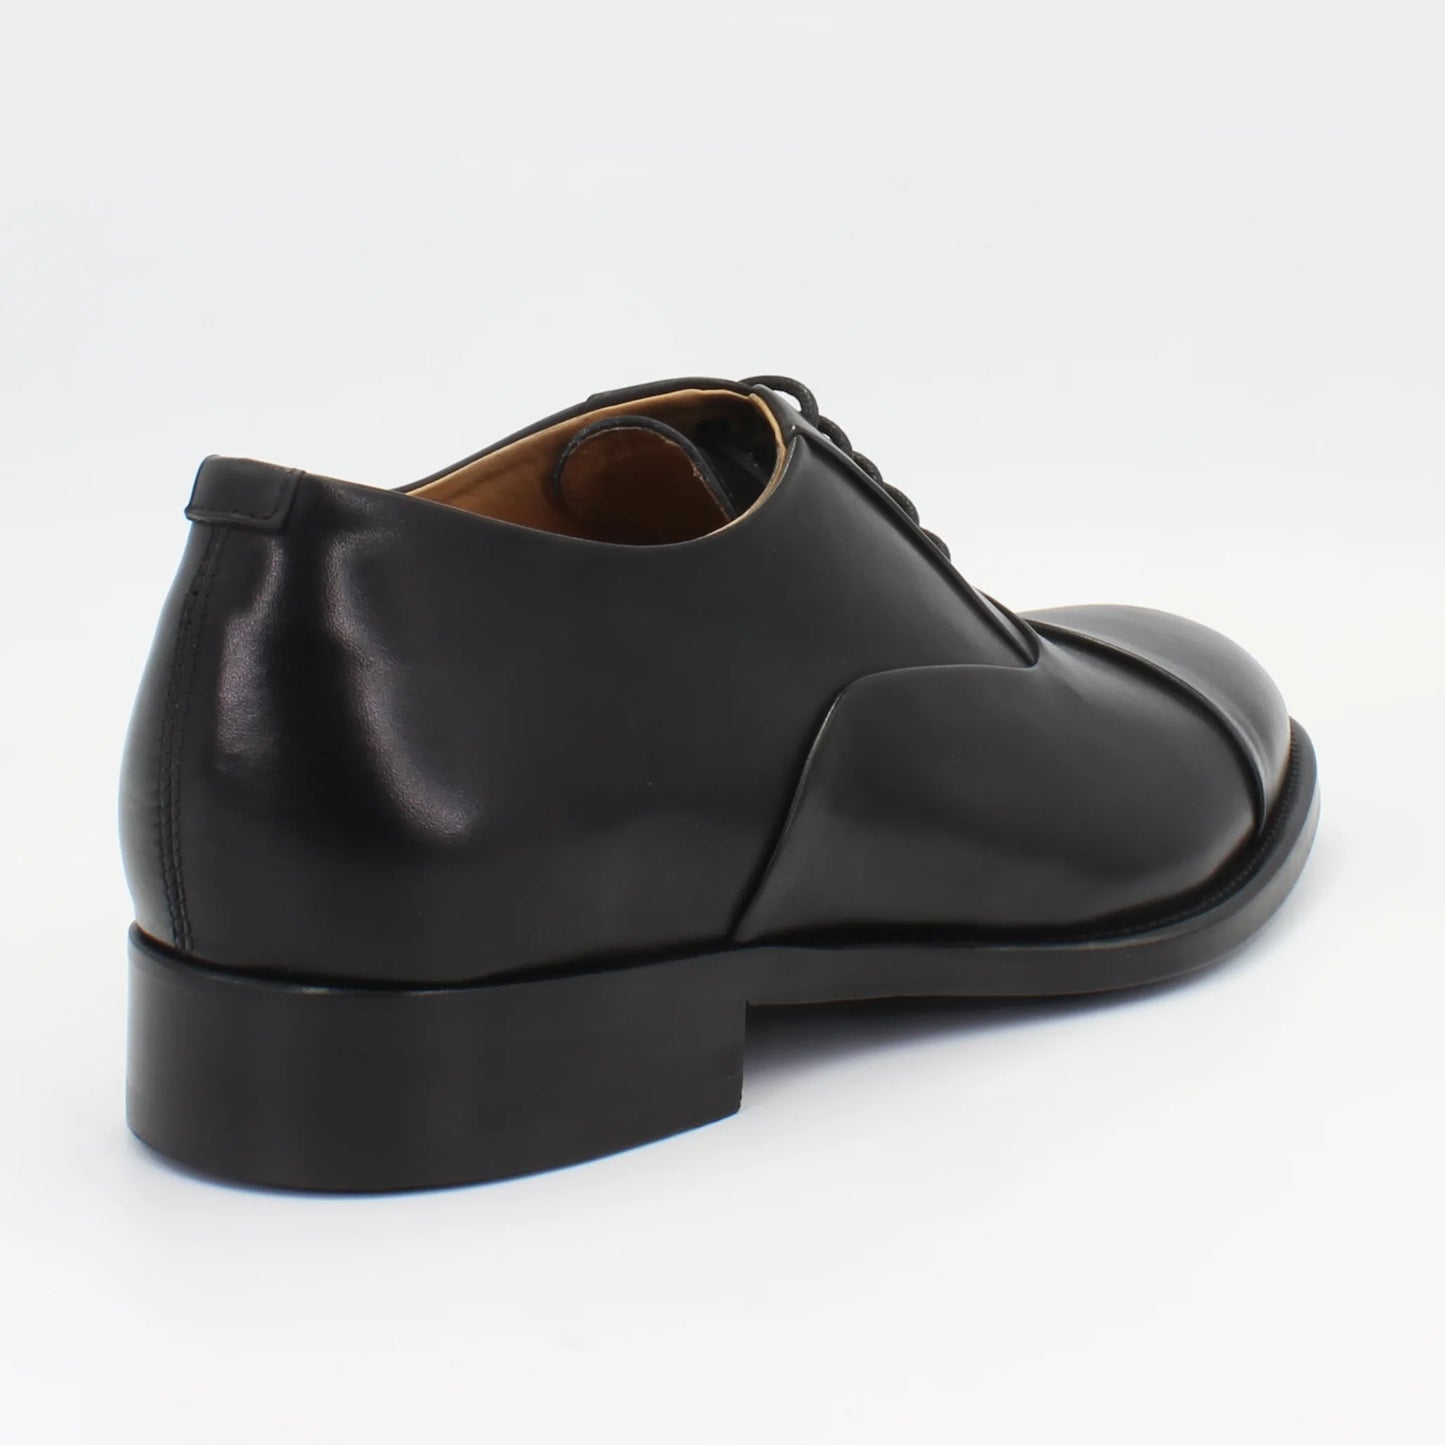 Shop Handmade Italian Leather Oxford in Nero (BRU11278)  or browse our range of hand-made Italian shoes for men in leather or suede in-store at Aliverti Cape Town, or shop online. We deliver in South Africa & offer multiple payment plans as well as accept multiple safe & secure payment methods.